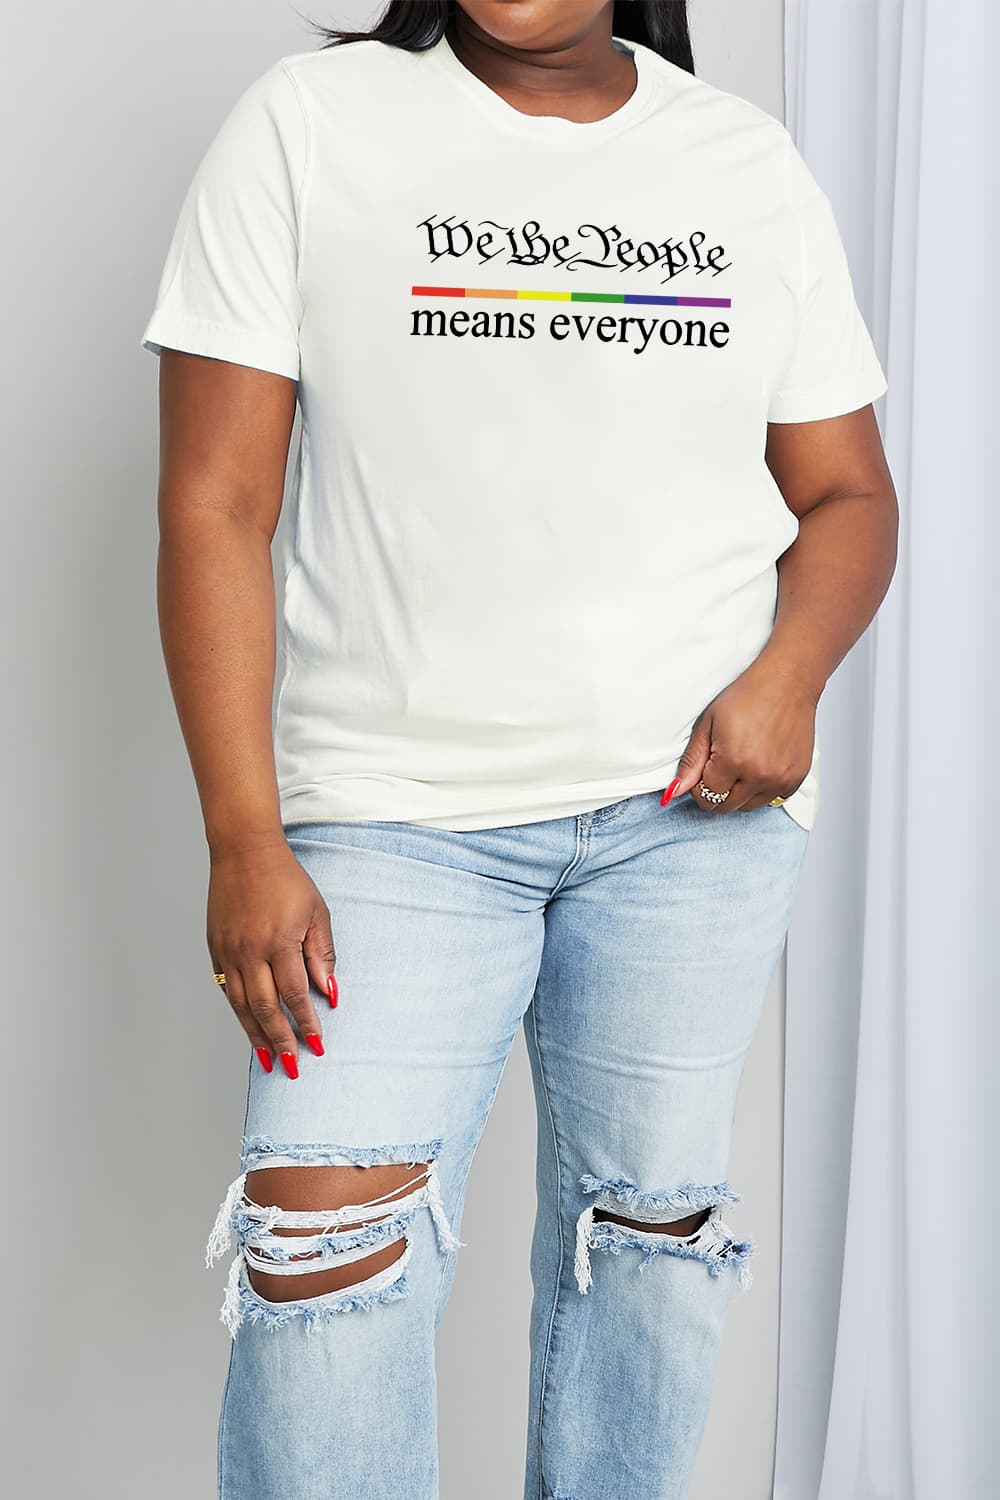 Simply Love Full Size MEANS EVERYONE Graphic Cotton Tee